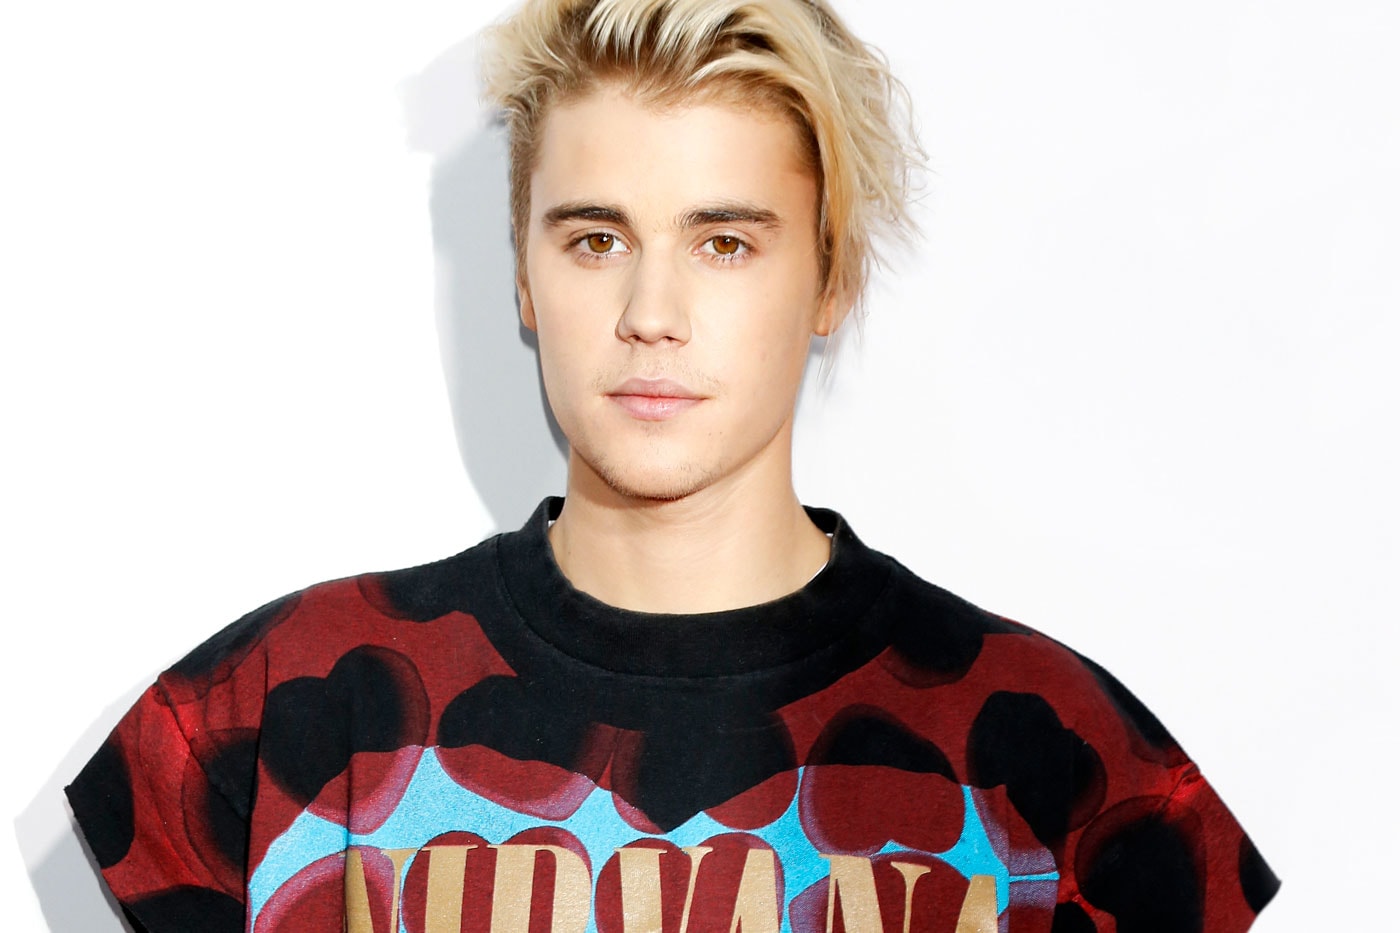 Justin Bieber Gets First No. 1 Song With "What Do You Mean?"